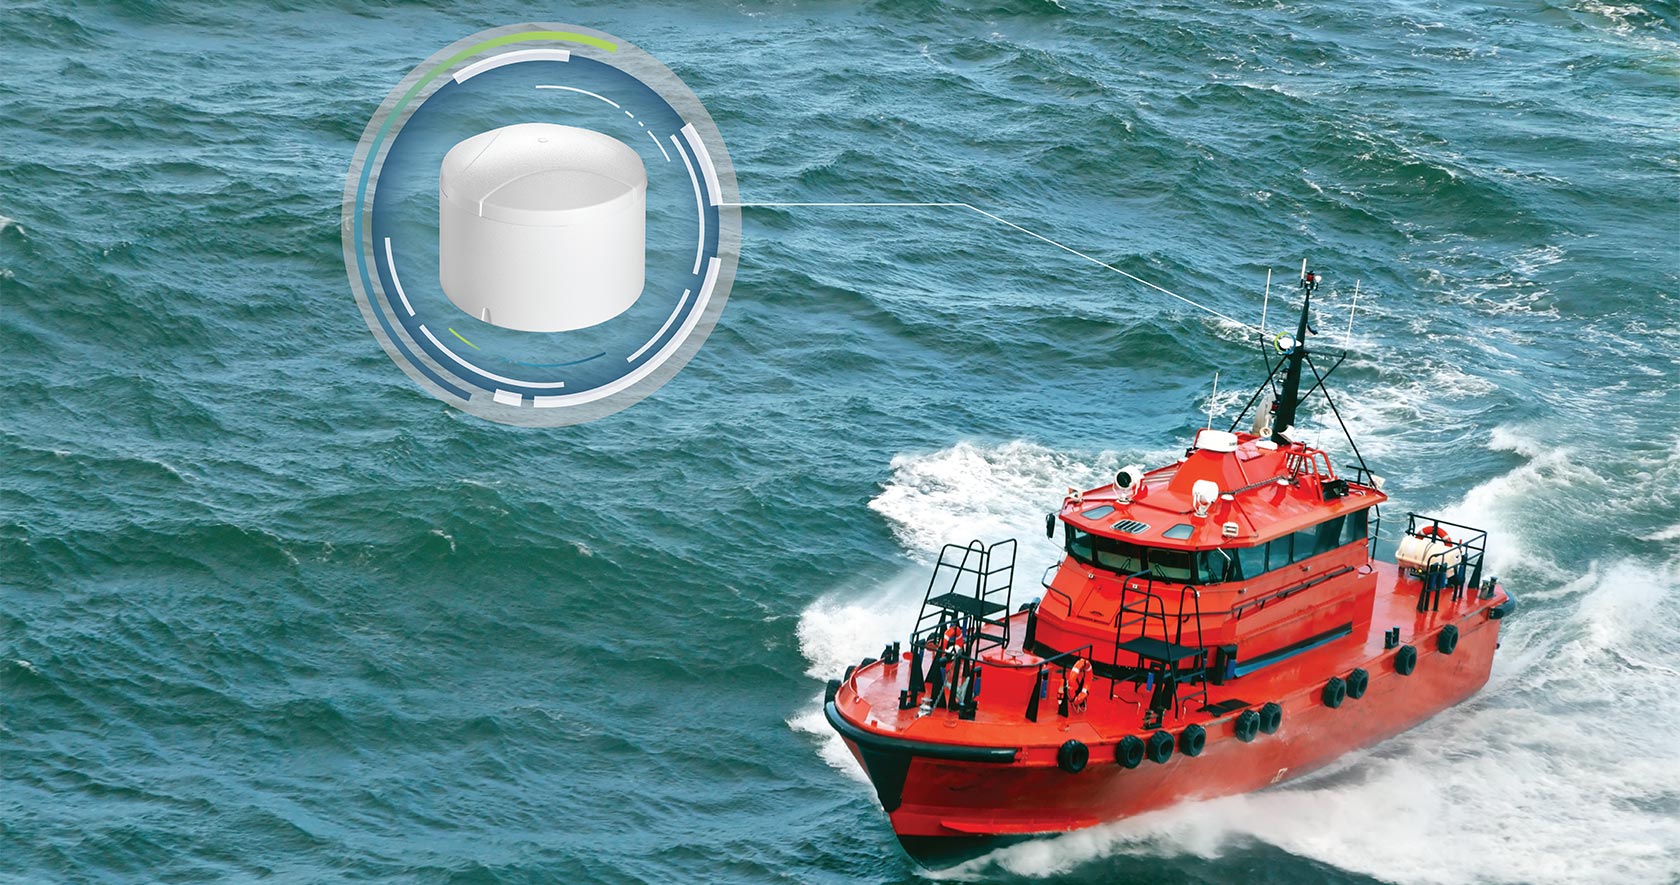 The white GAJT-410MS protects nearshore operations like hydrographic survey, dredging and piloting from interference, jamming and spoofing attacks at sea.